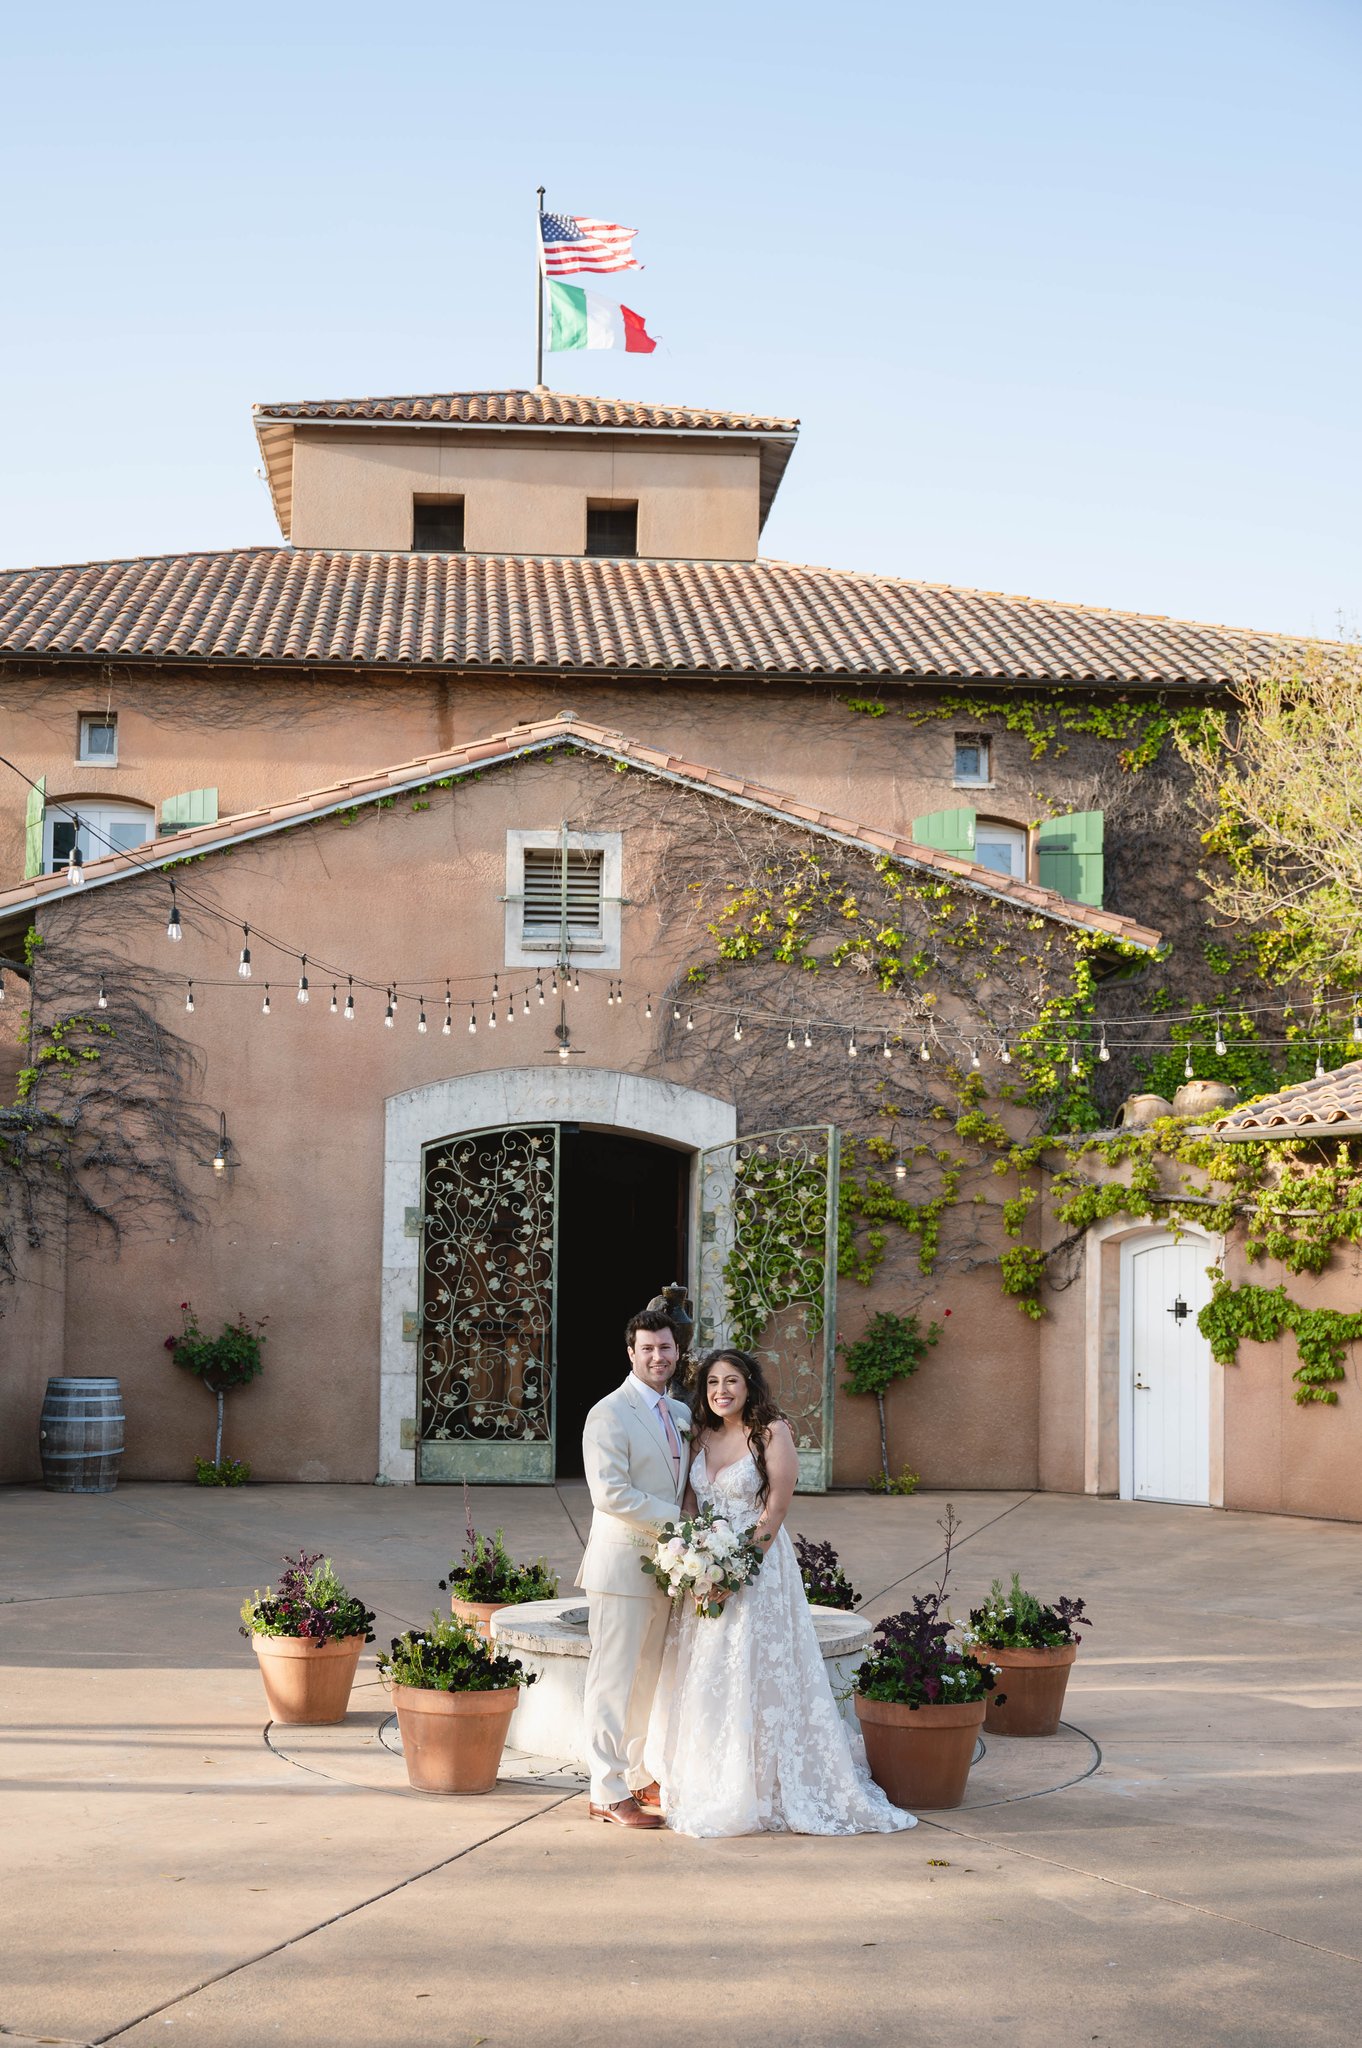 Italian themed wedding. Couple standing in front of vianse winery sonoma, california